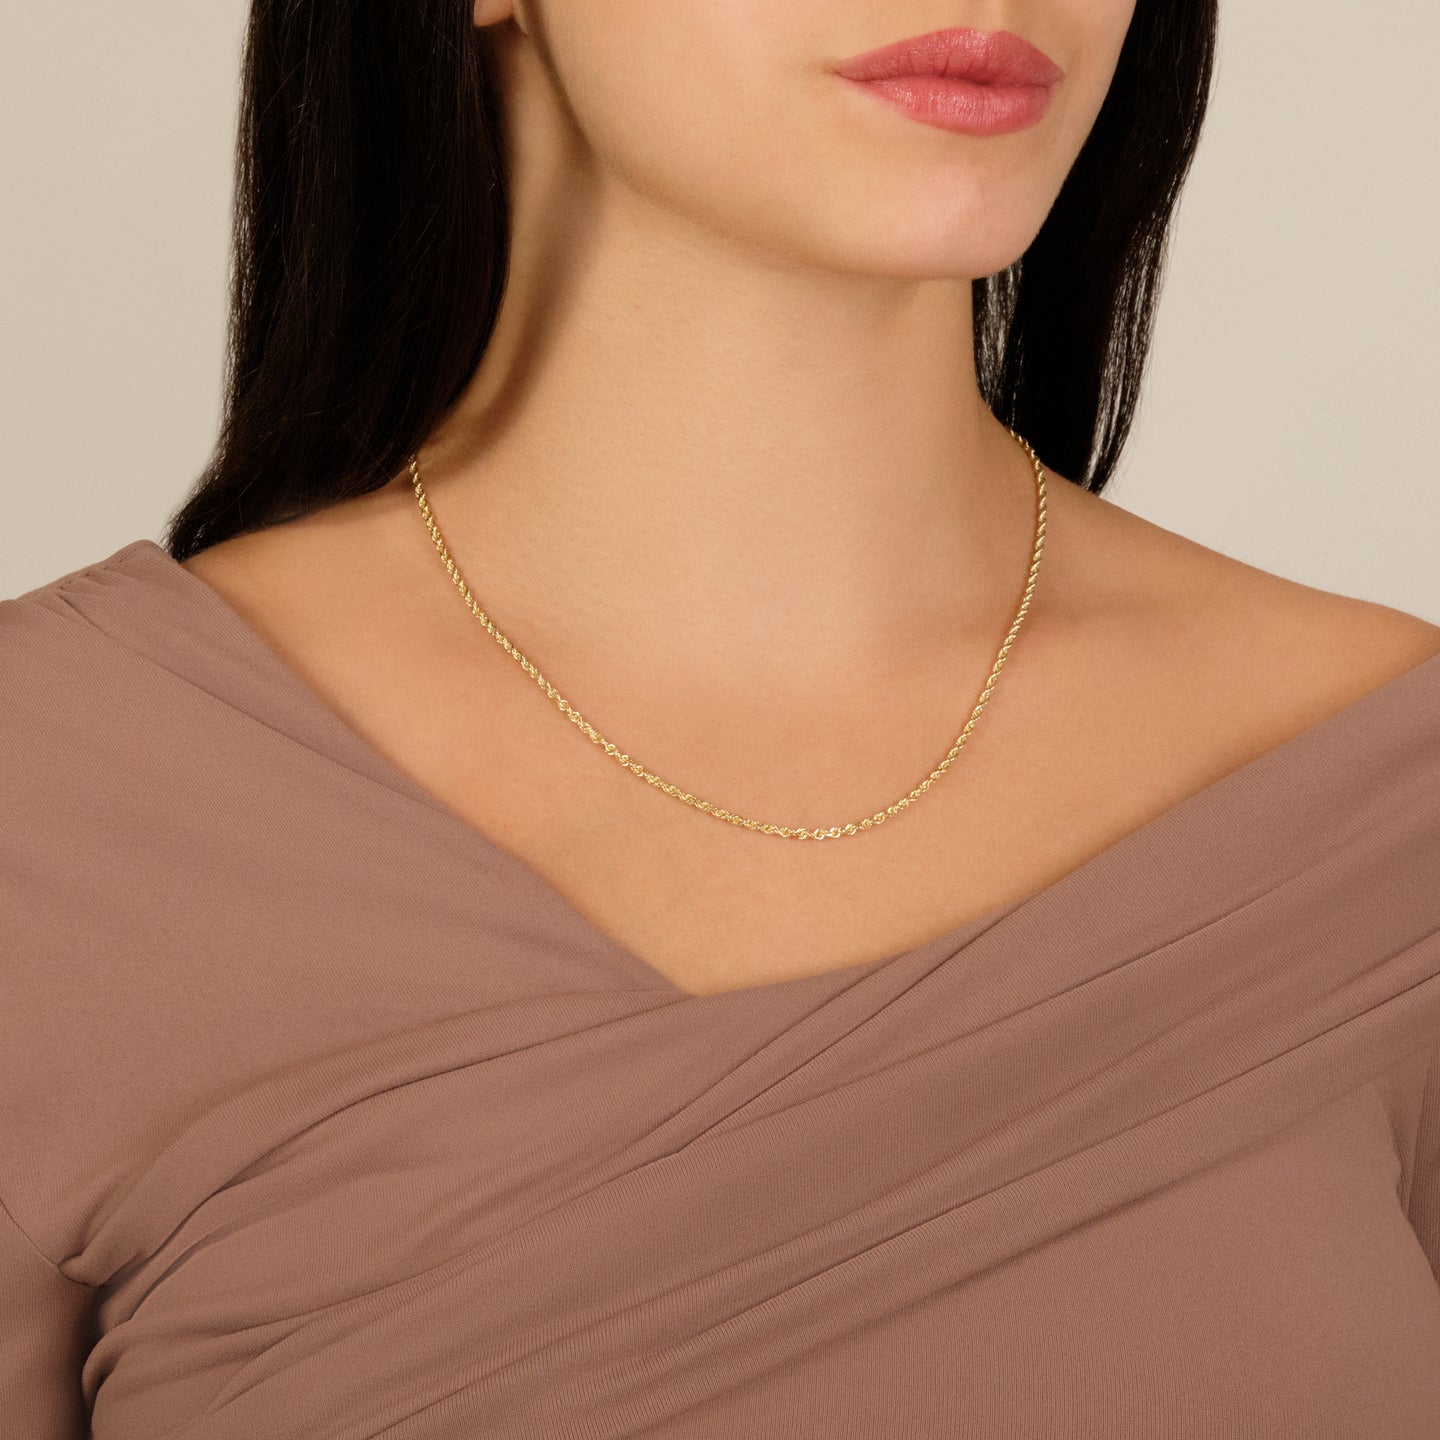 Stone and Strand Gold Chain Necklace